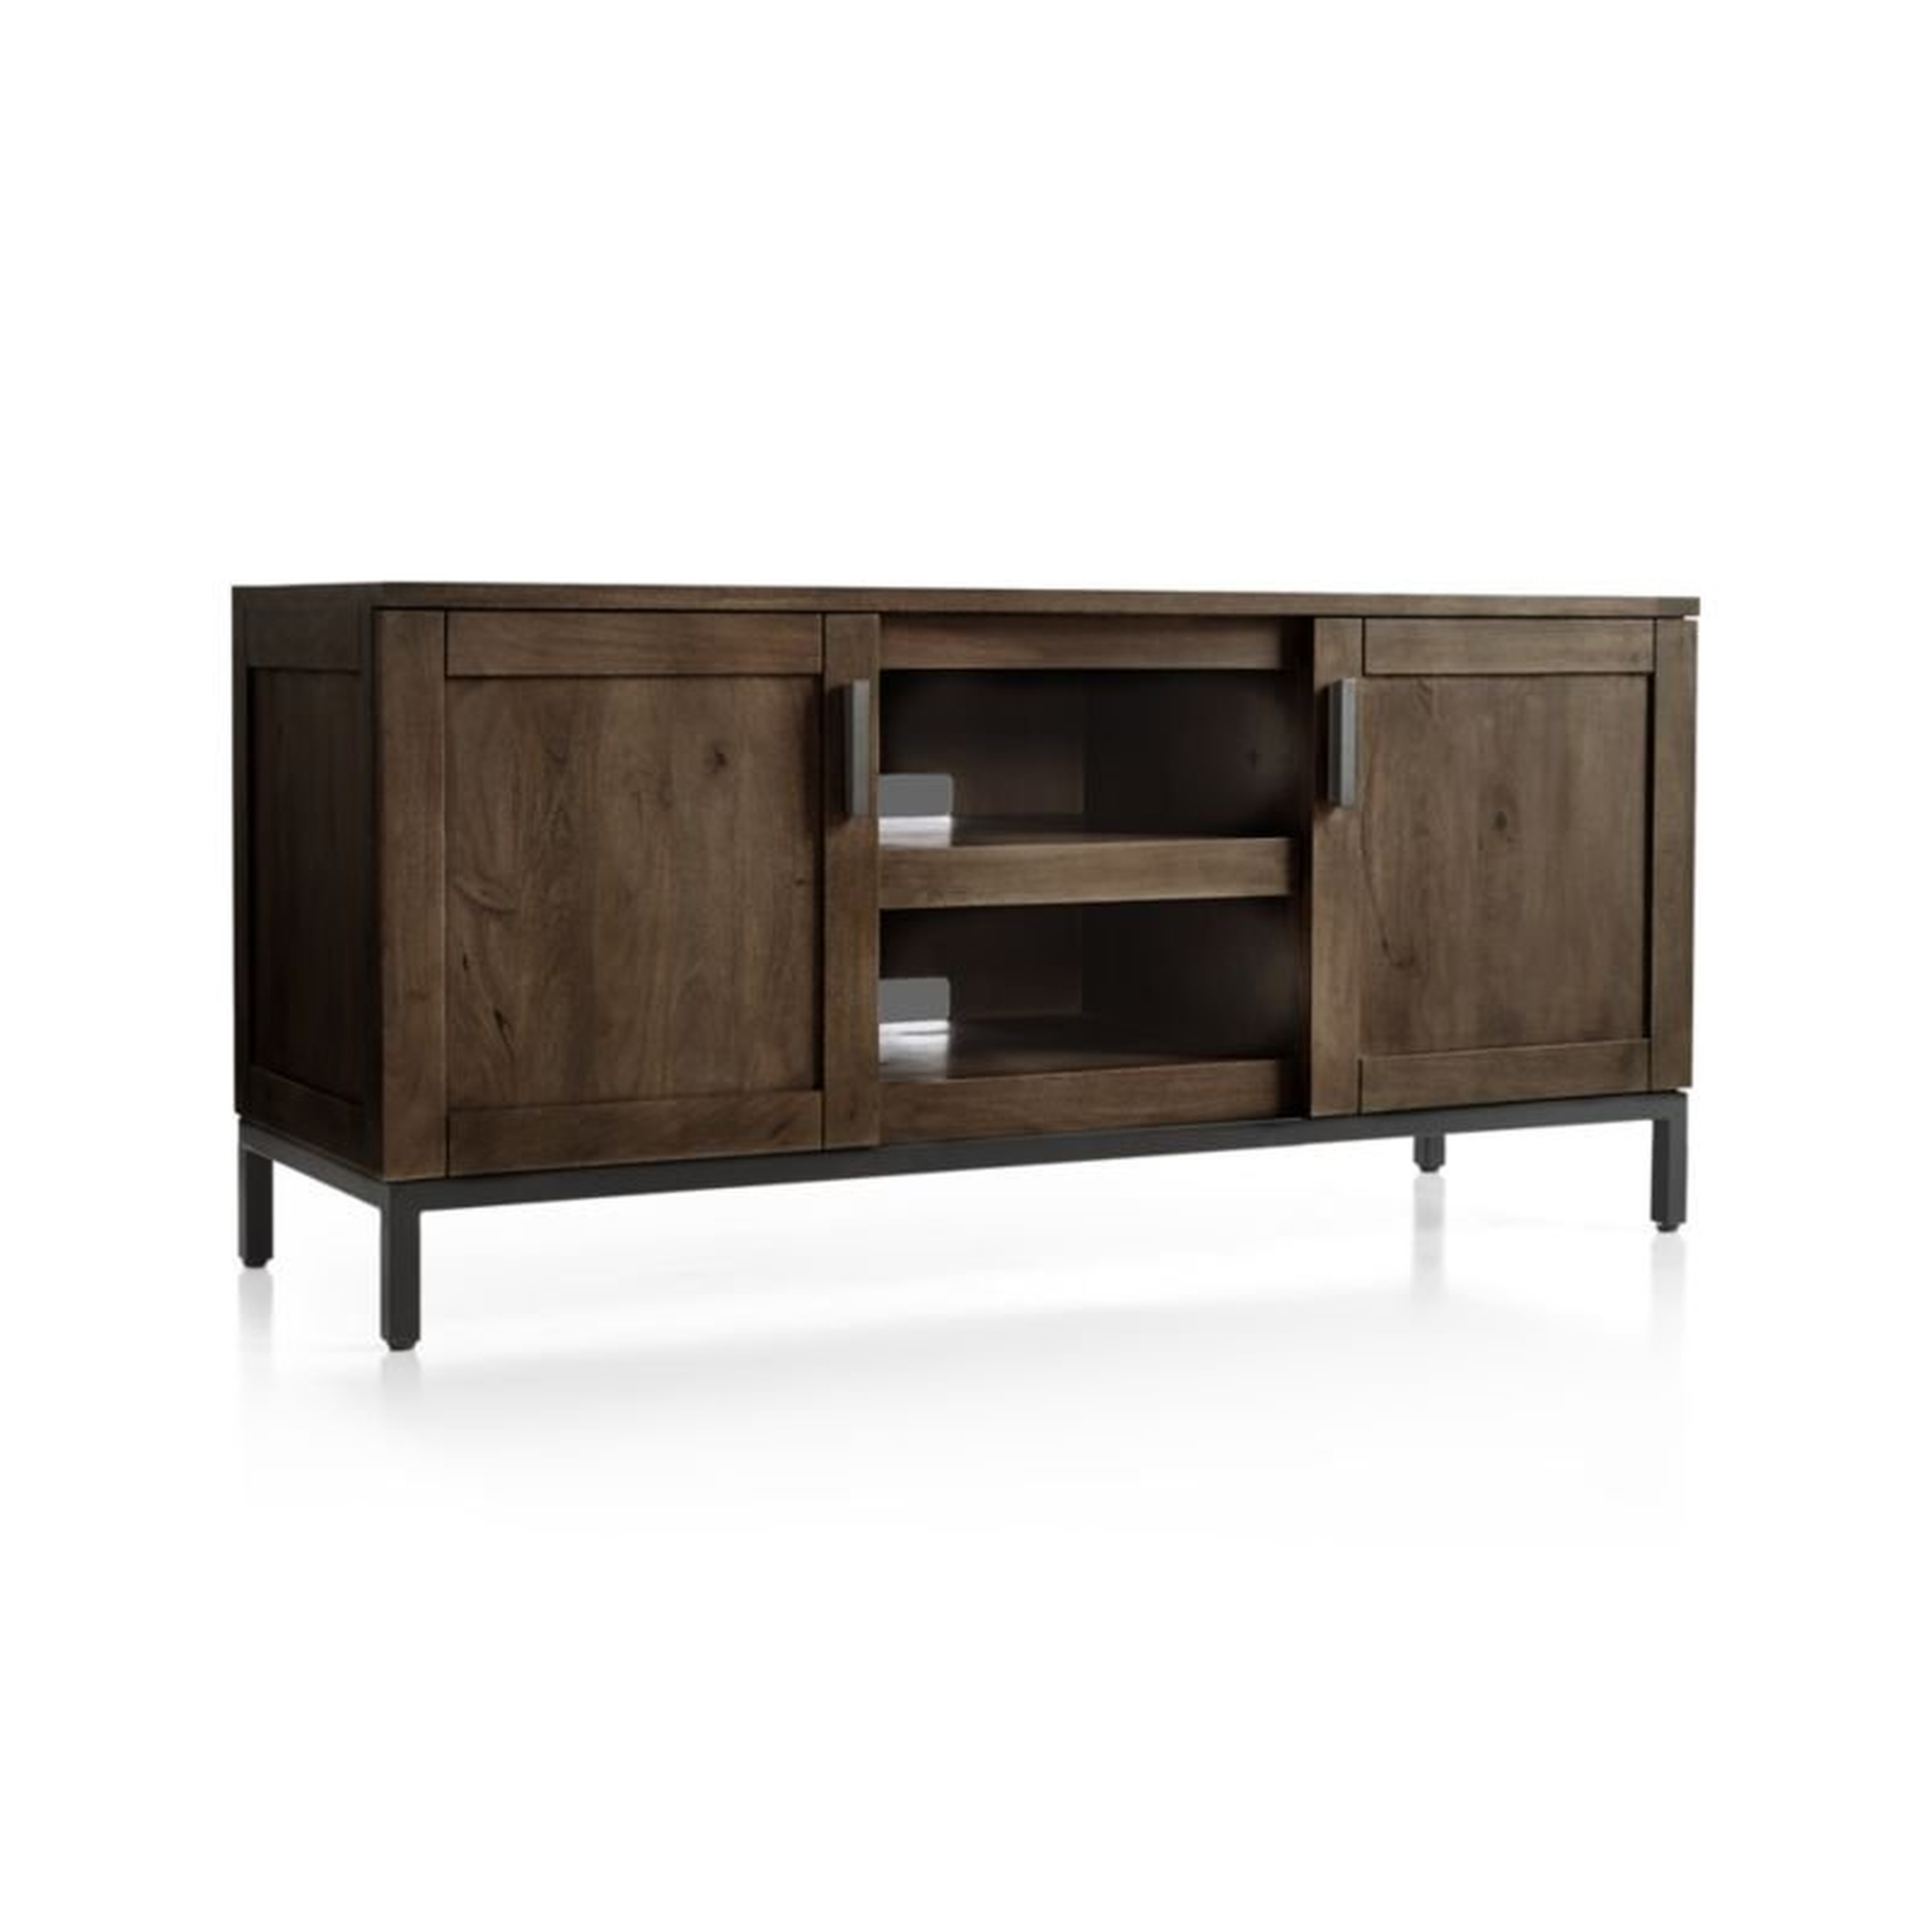 Wyatt 60" Brown Wood Storage Media Console - Crate and Barrel